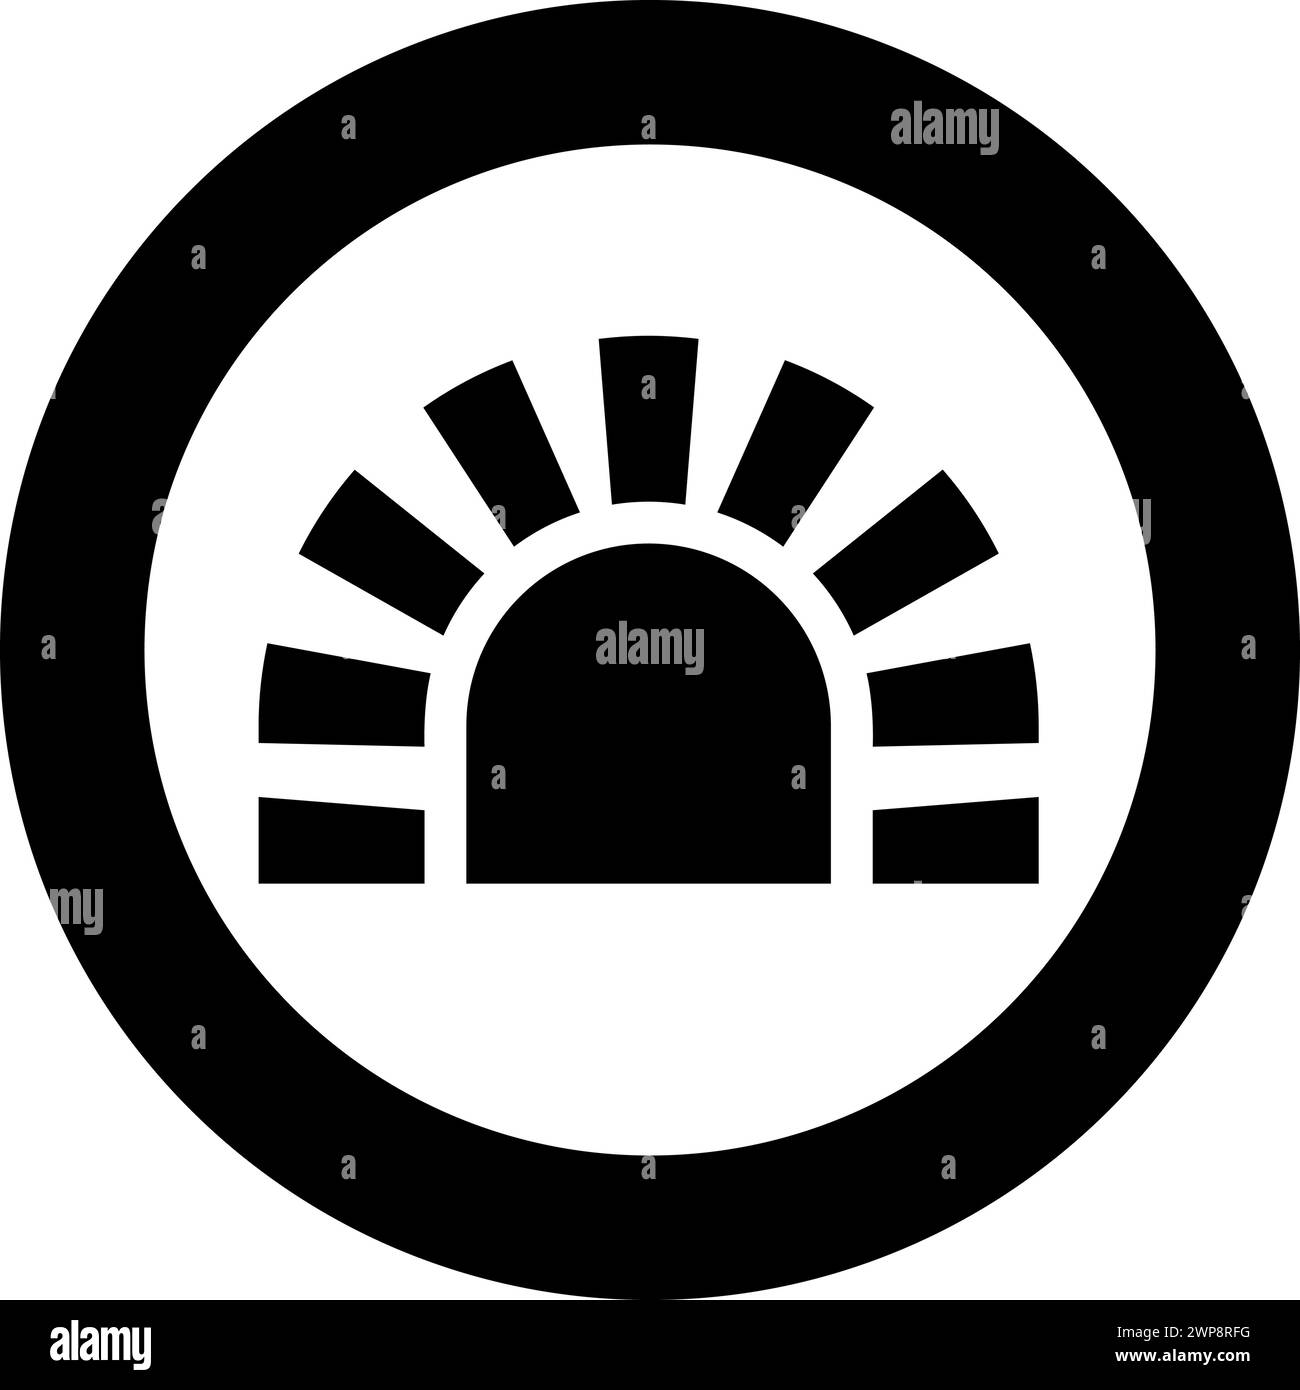 Stone stove brick oven fireplace fireplace for cooking and baking furnace traditional icon in circle round black color vector illustration image Stock Vector